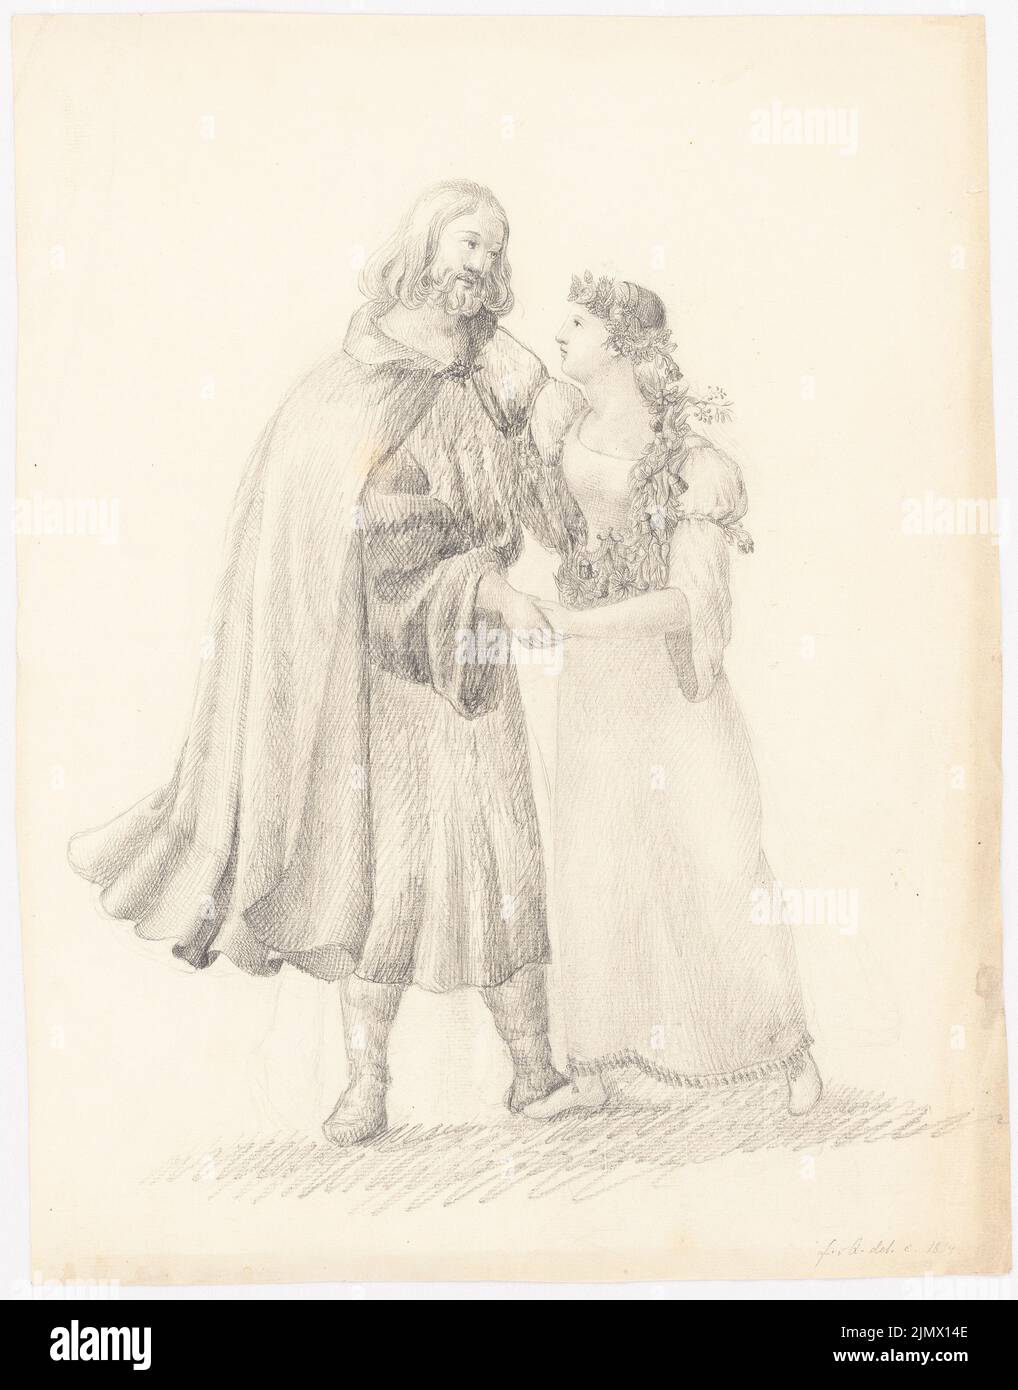 Quast Ferdinand von (1807-1877), couple in Minnes scene (1824): man and young woman with flowers in her hair, in tender pose or dance. Pencil on paper, 45.6 x 35.7 cm (including scan edges) Quast Ferdinand von  (1807-1877): Paar in Minneszene Stock Photo